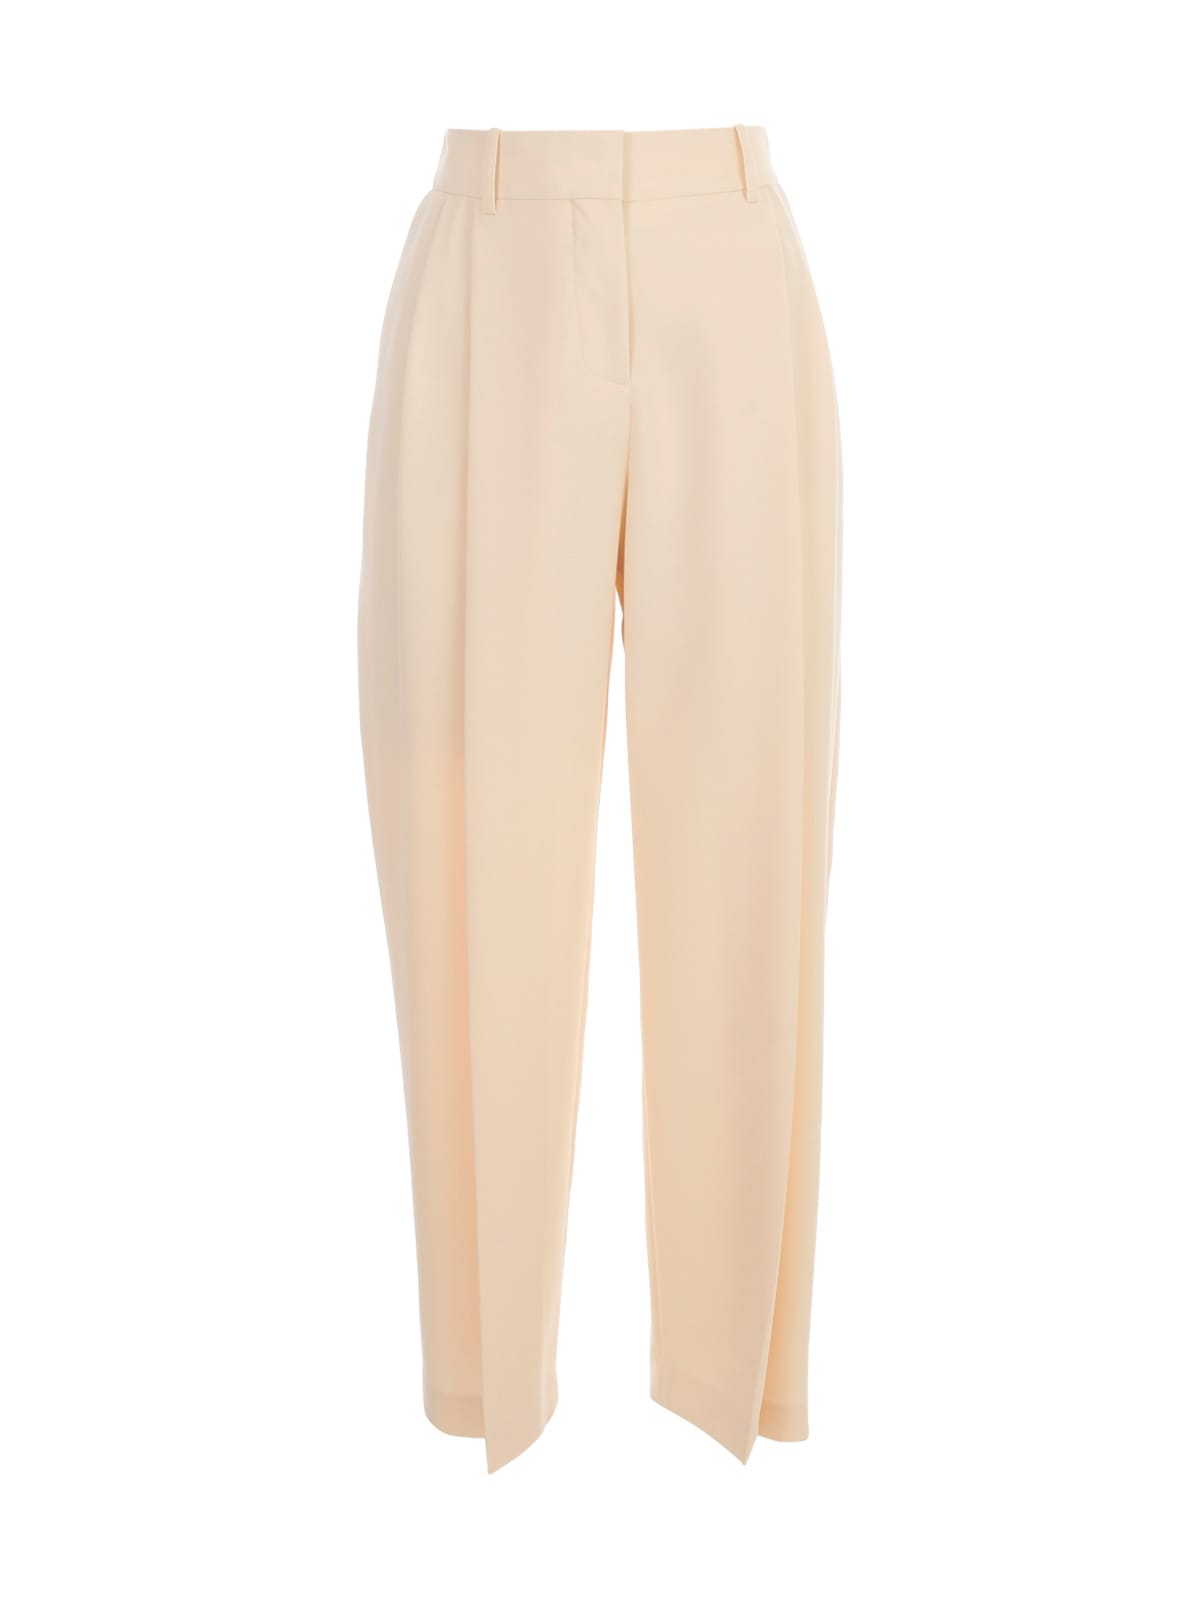 See by Chloé Short Straight Pants